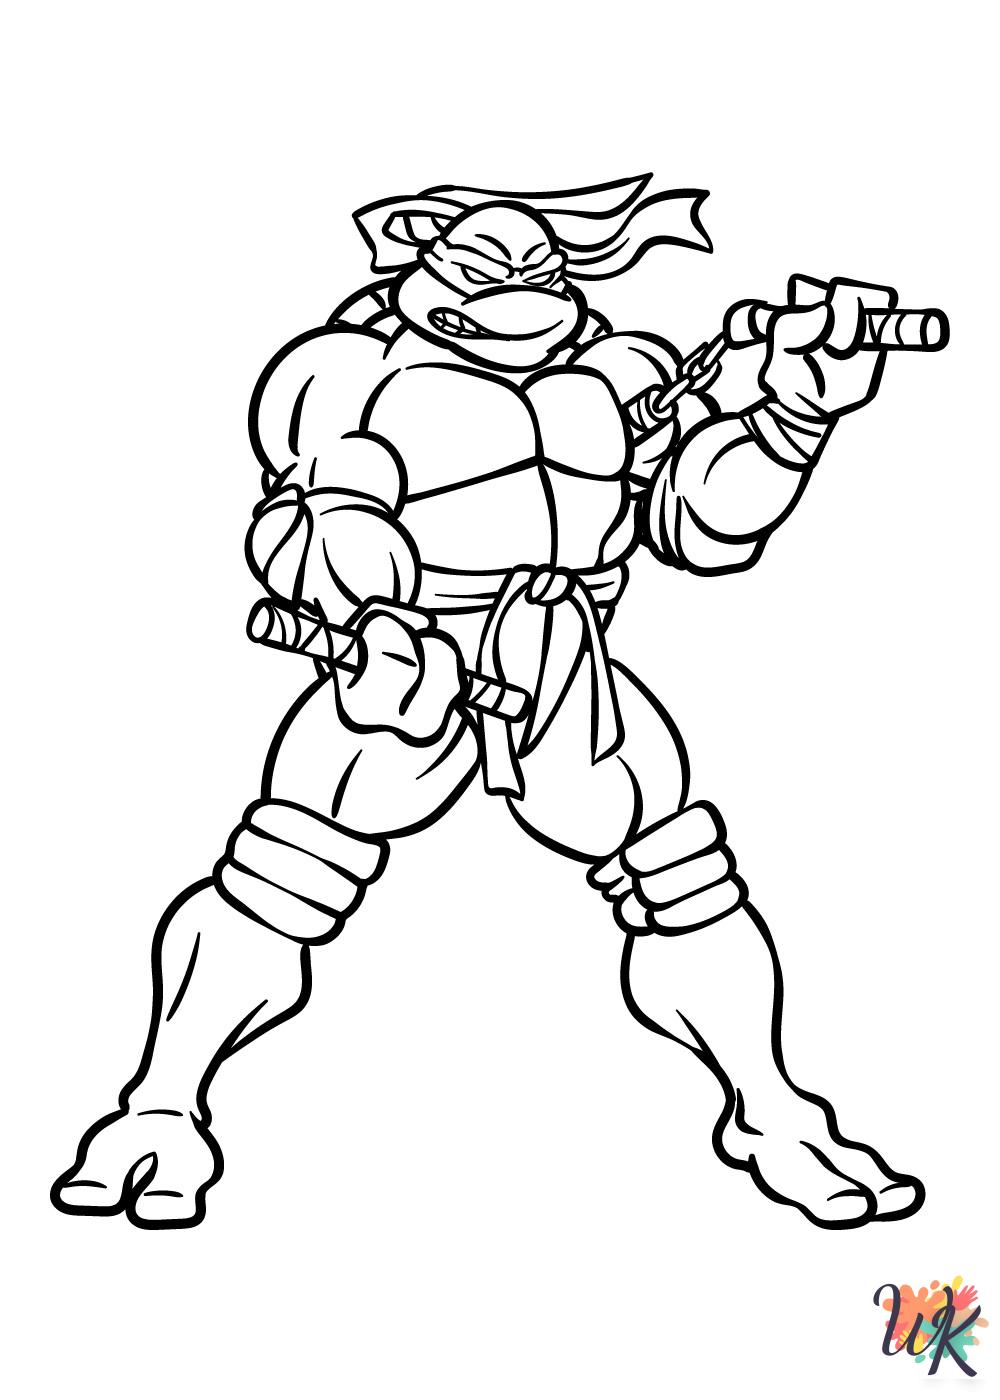 printable Ninja Turtles coloring pages for adults